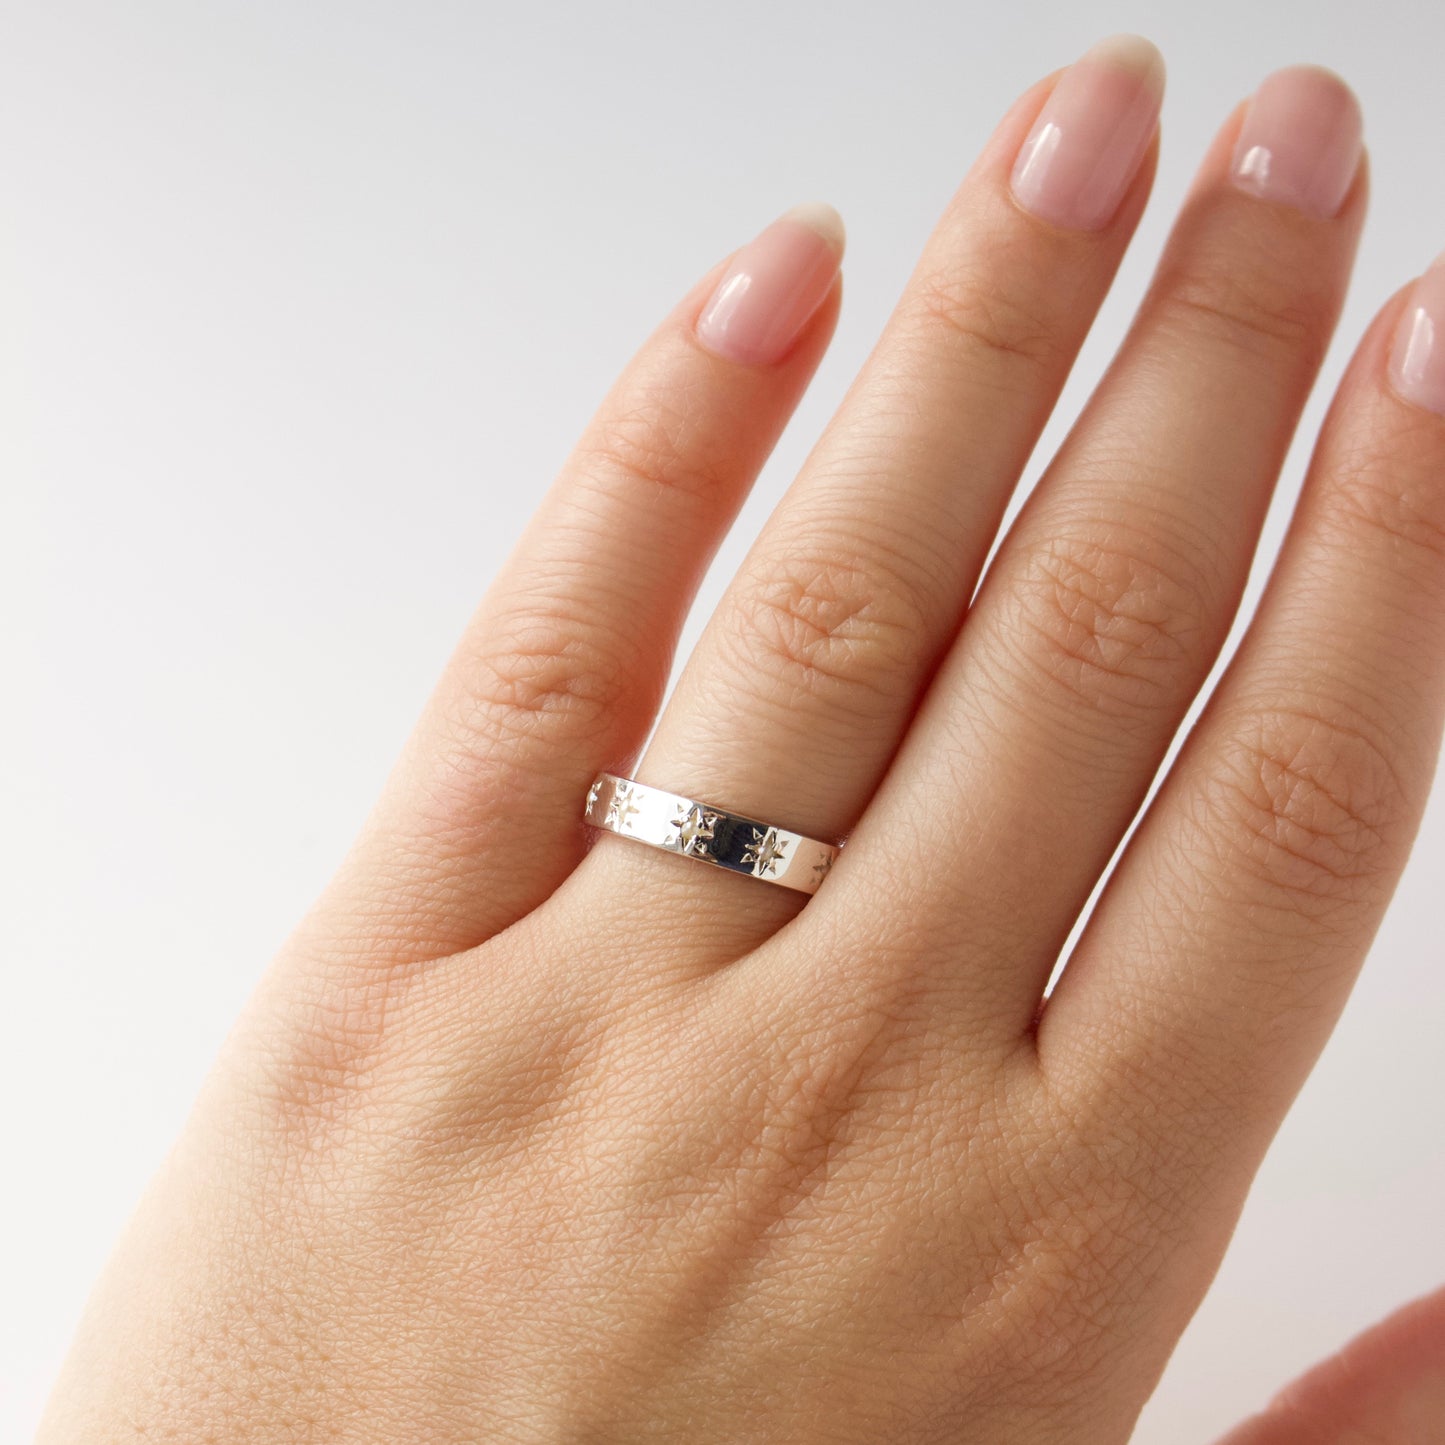 zoe sugg intentions pearl luck ring in silver